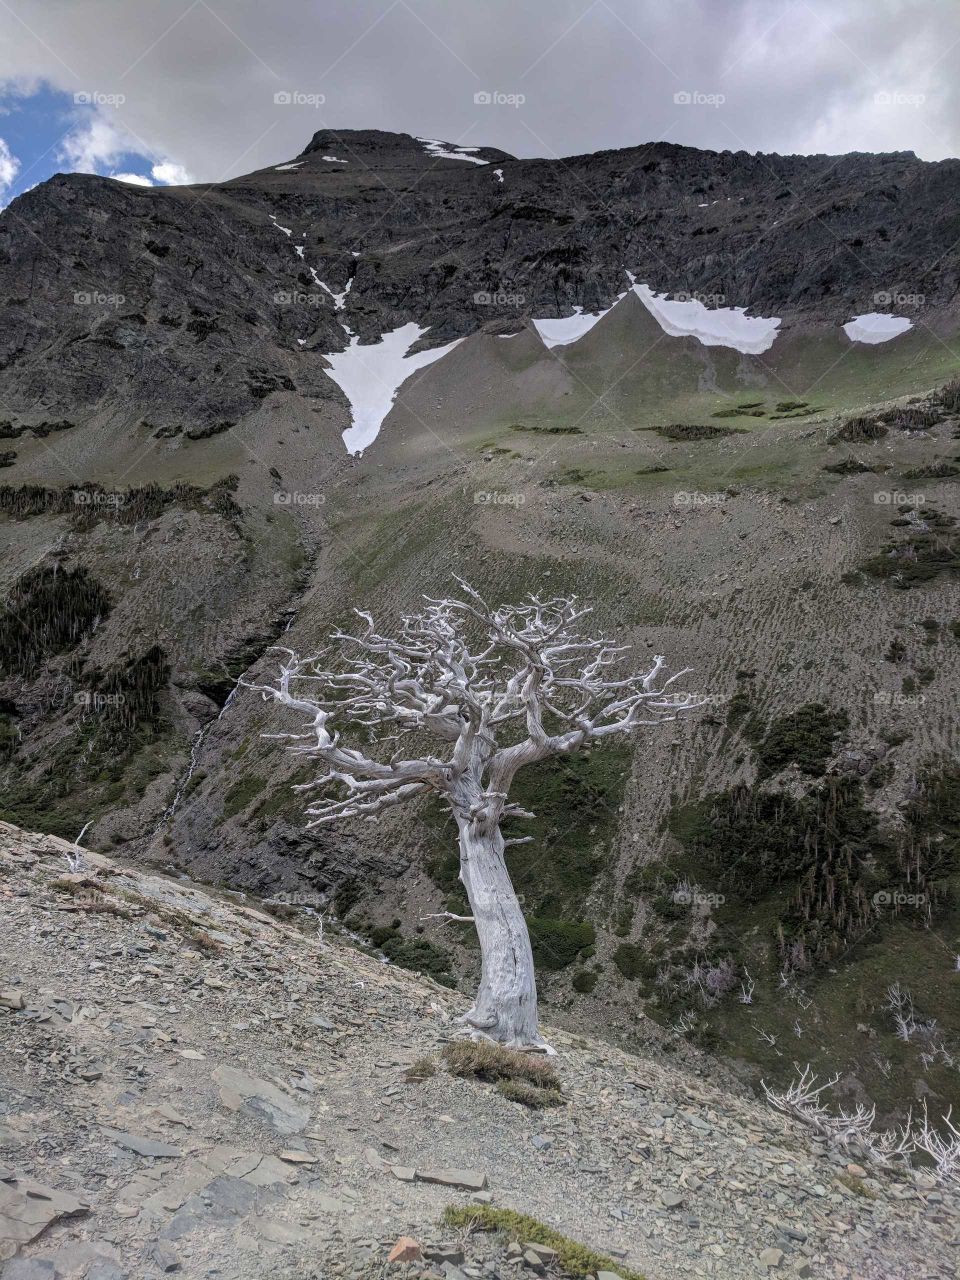 Ghostly, Dead, Solo Tree on Scenic Point Hiking Trail in Glacier National Park in Montana